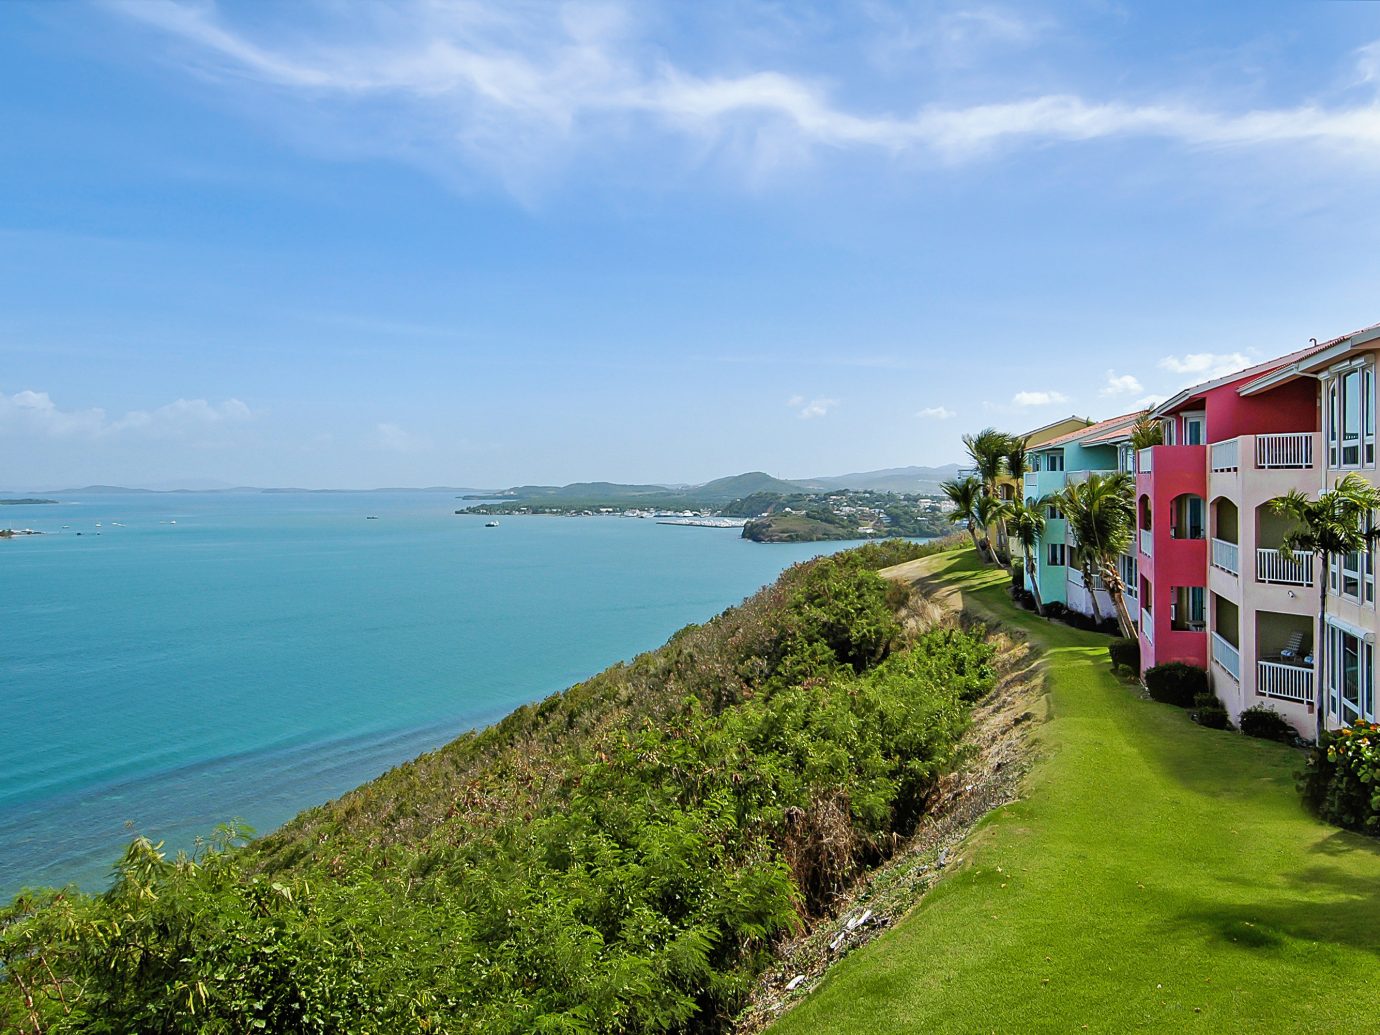 Hotels sky grass outdoor water Coast Sea landform geographical feature body of water shore Town vacation Beach Ocean bay Nature green tourism waterway cove cliff terrain Island cape grassy traveling lush hillside